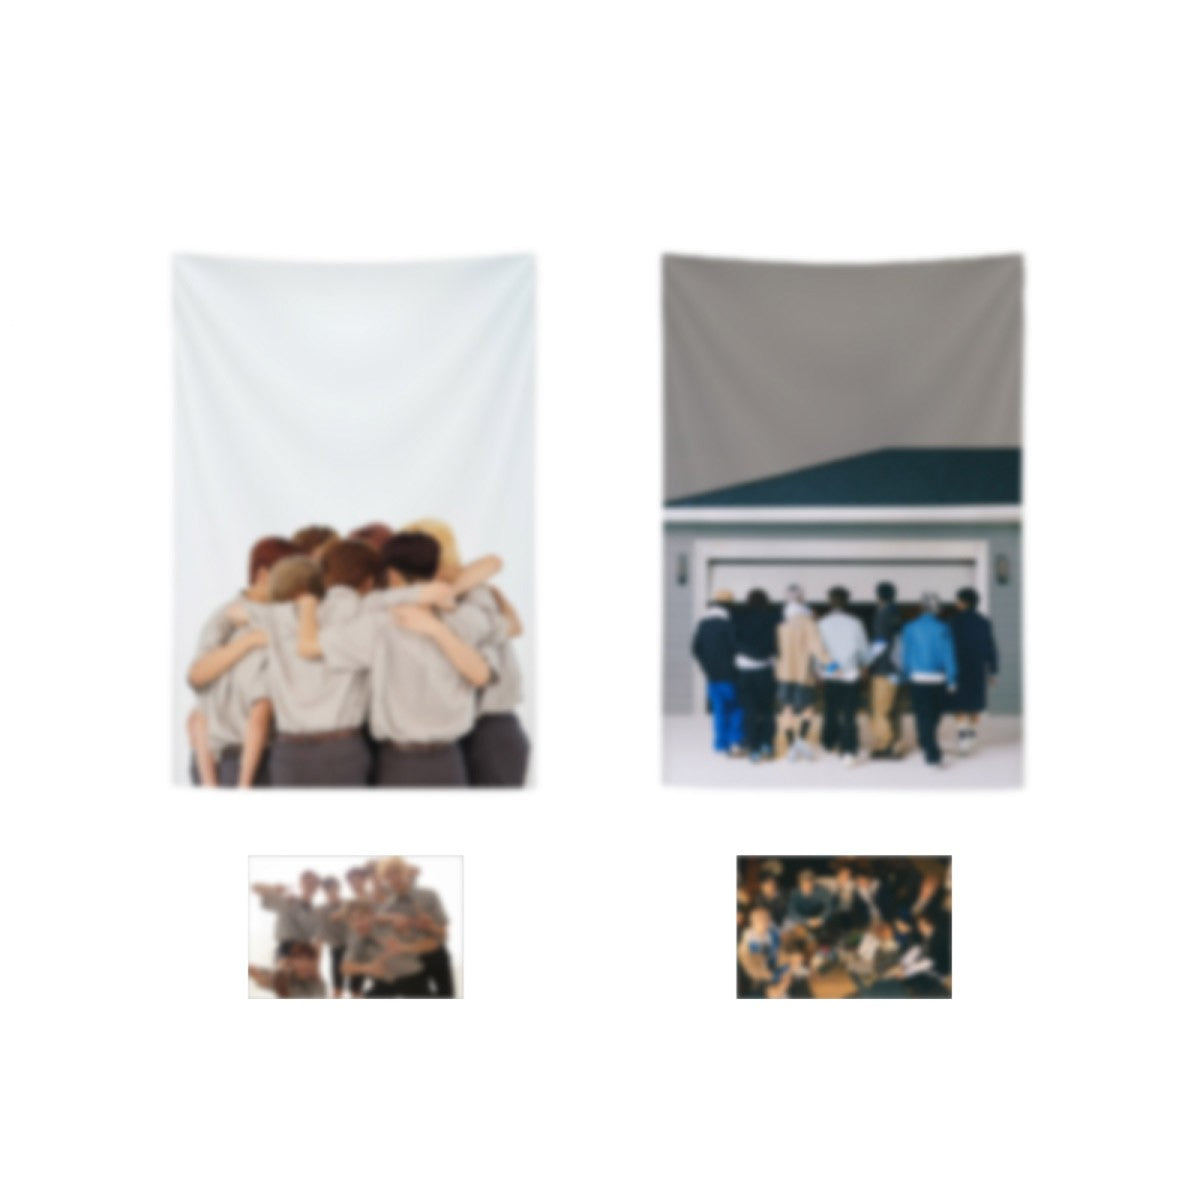 NCT DREAM THEATER OF DREAMS Goods - Chiffon Fabric Poster_154525.jpg